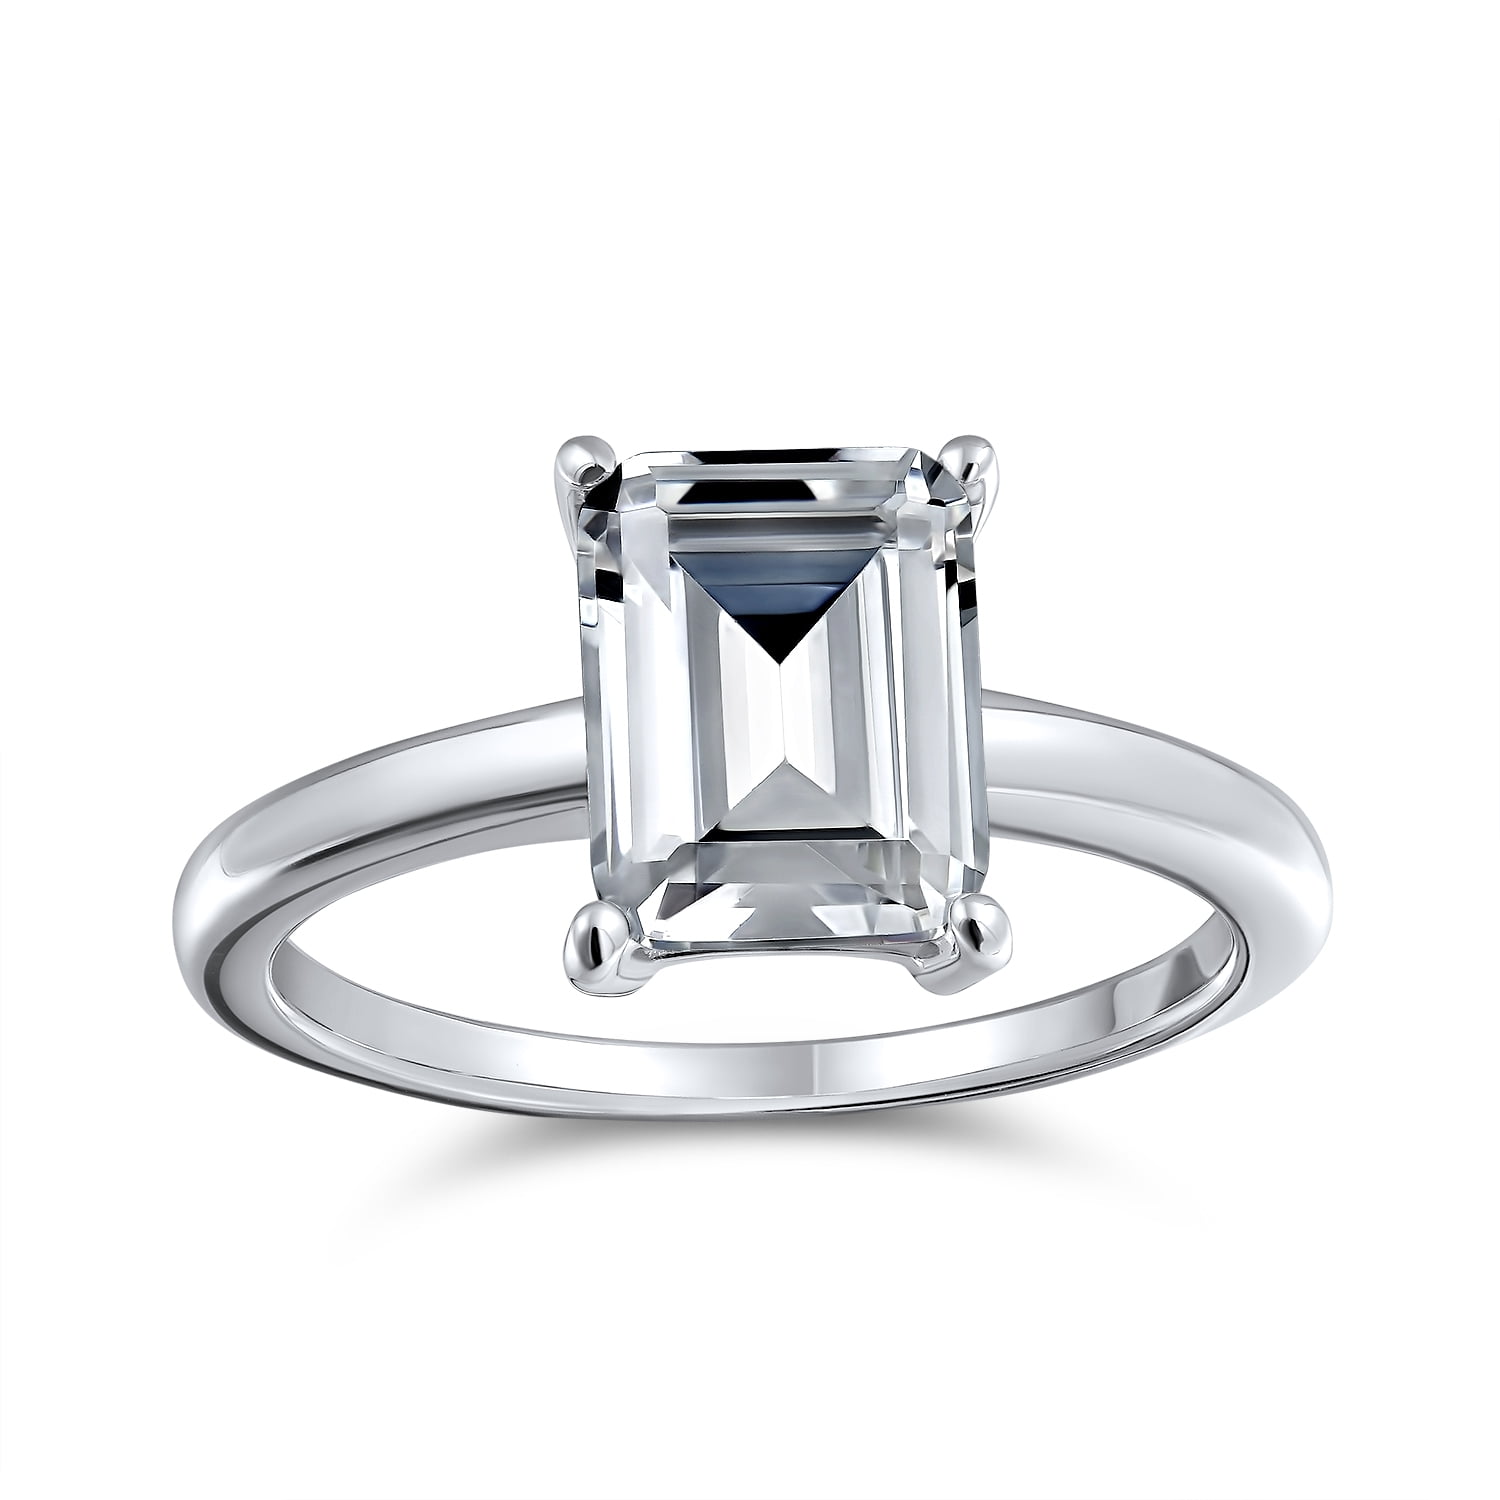 Natural Emerald Cut Diamond & Sapphire  Solitaire Engagement Ring 925 Sterling Silver Ring Handmade Ring Gift For Her